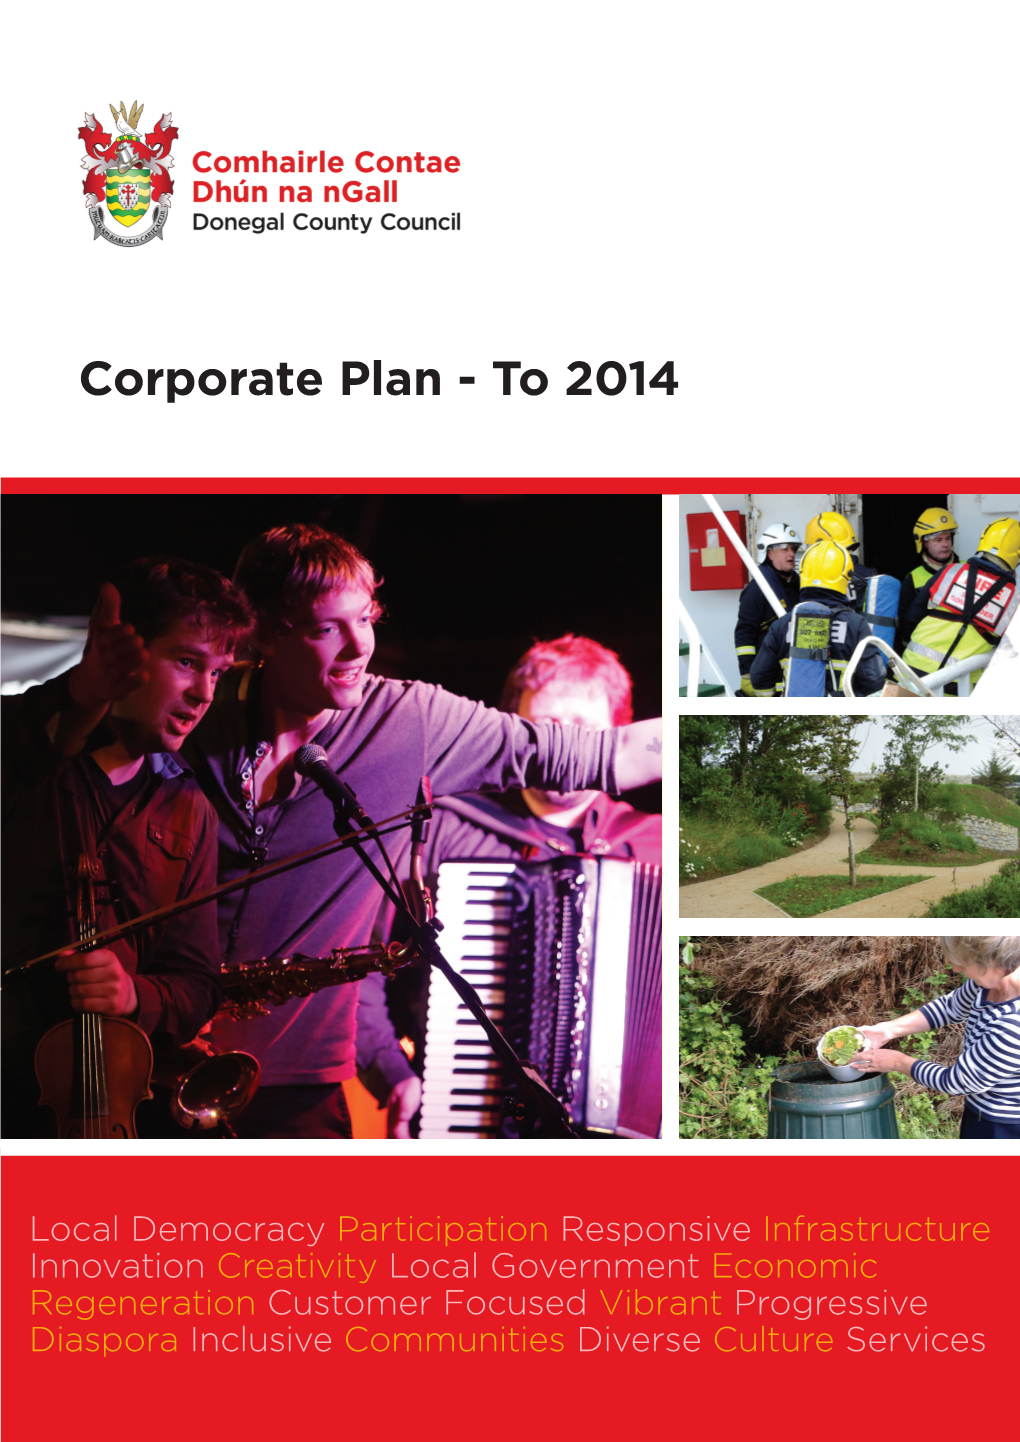 Donegal County Council Corporate Plan to 2014